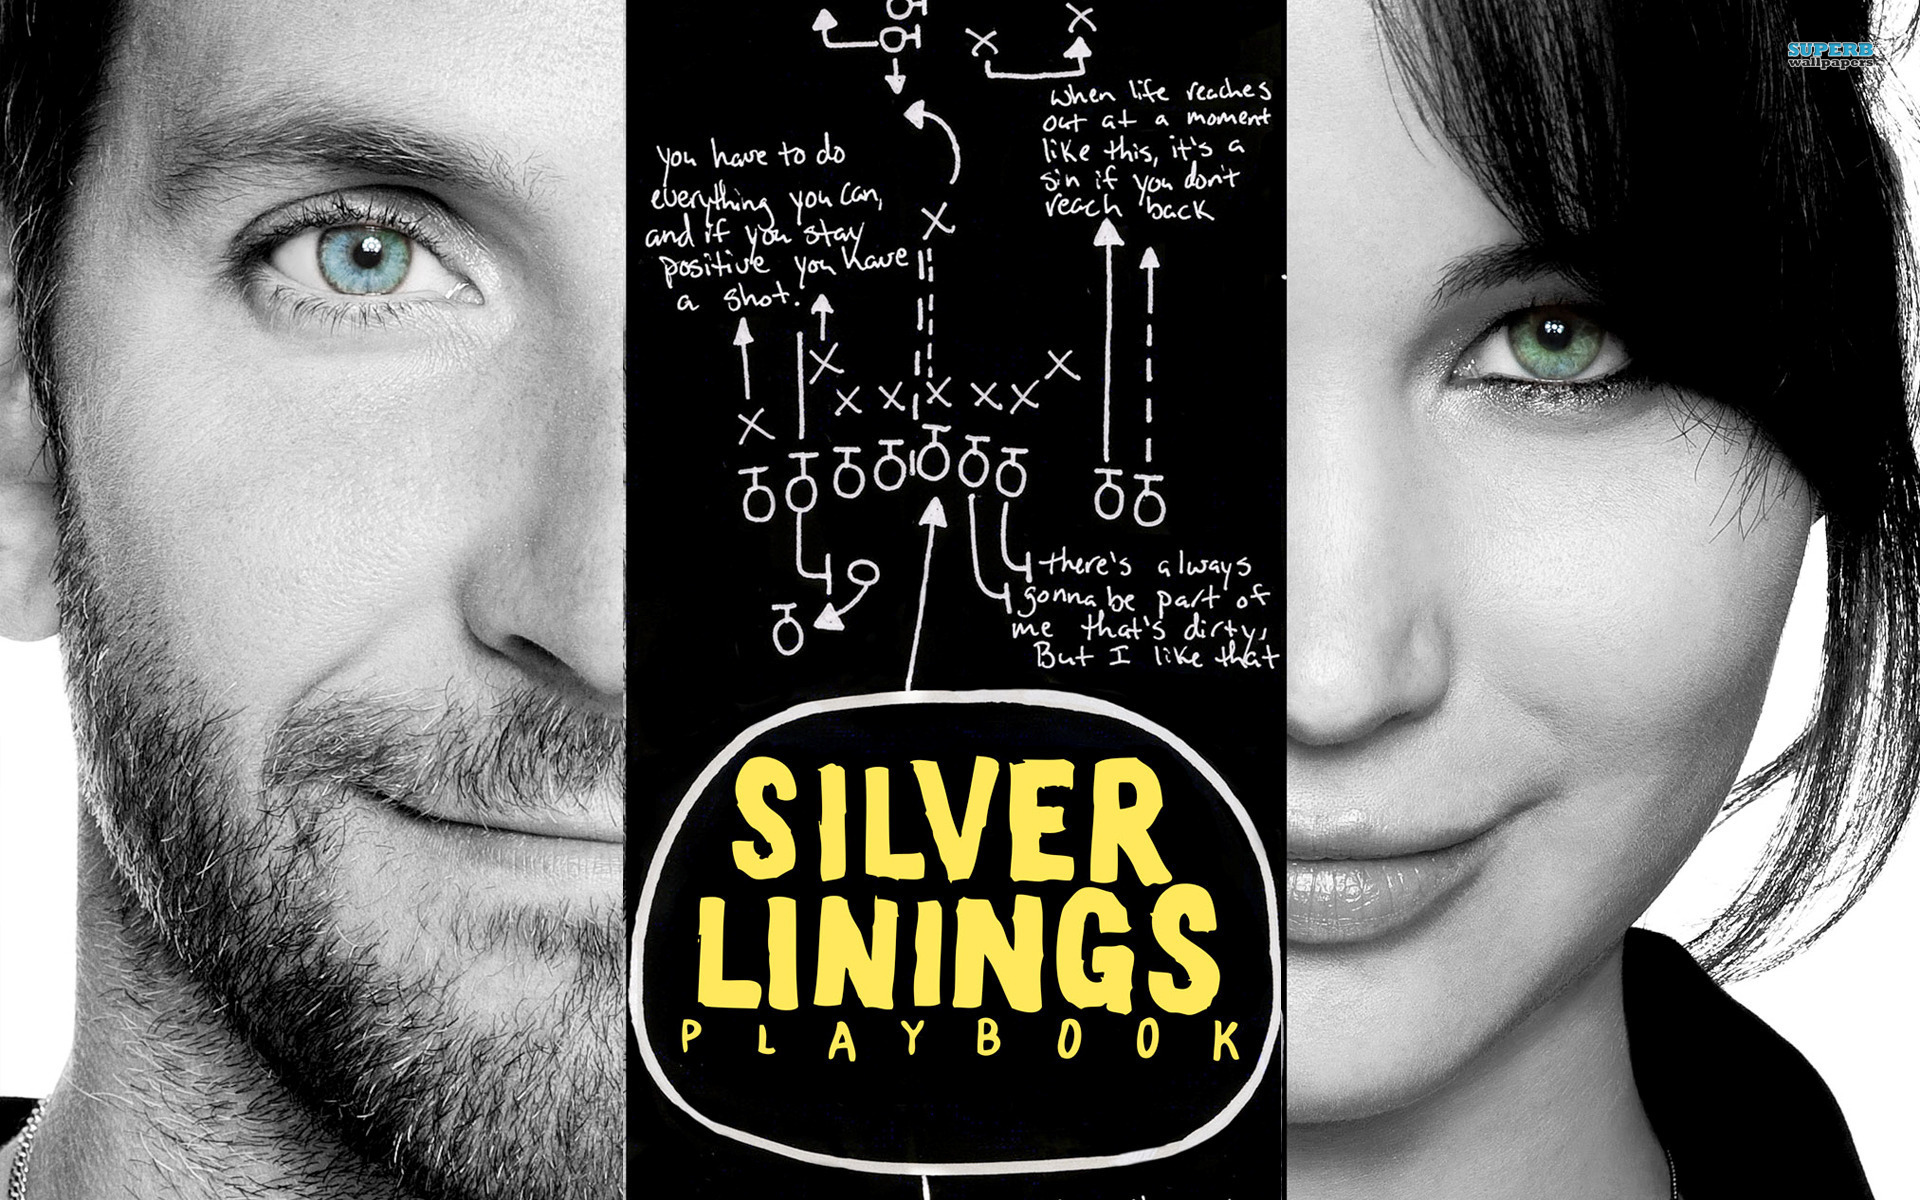 pat-and-tiffany-silver-linings-playbook-15808-1920x1200